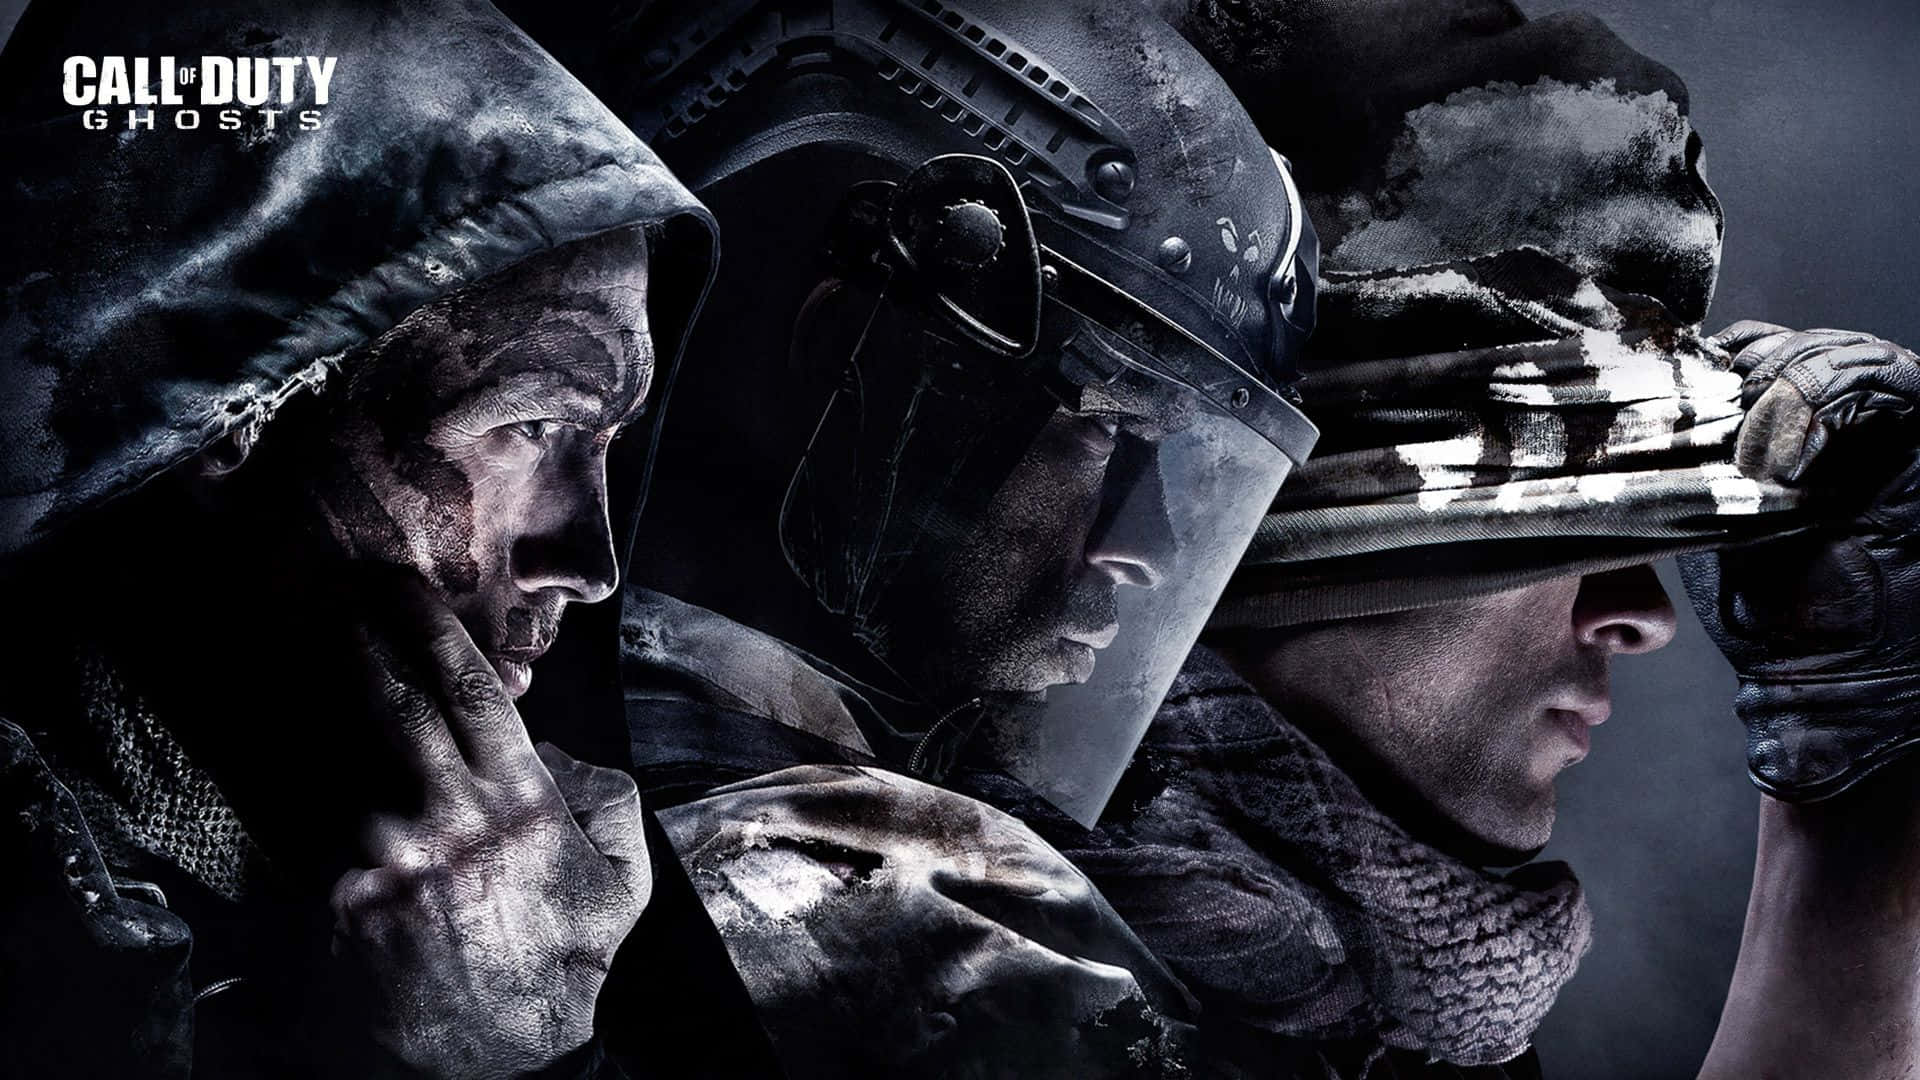 Intense Call of Duty Ghosts Action Wallpaper